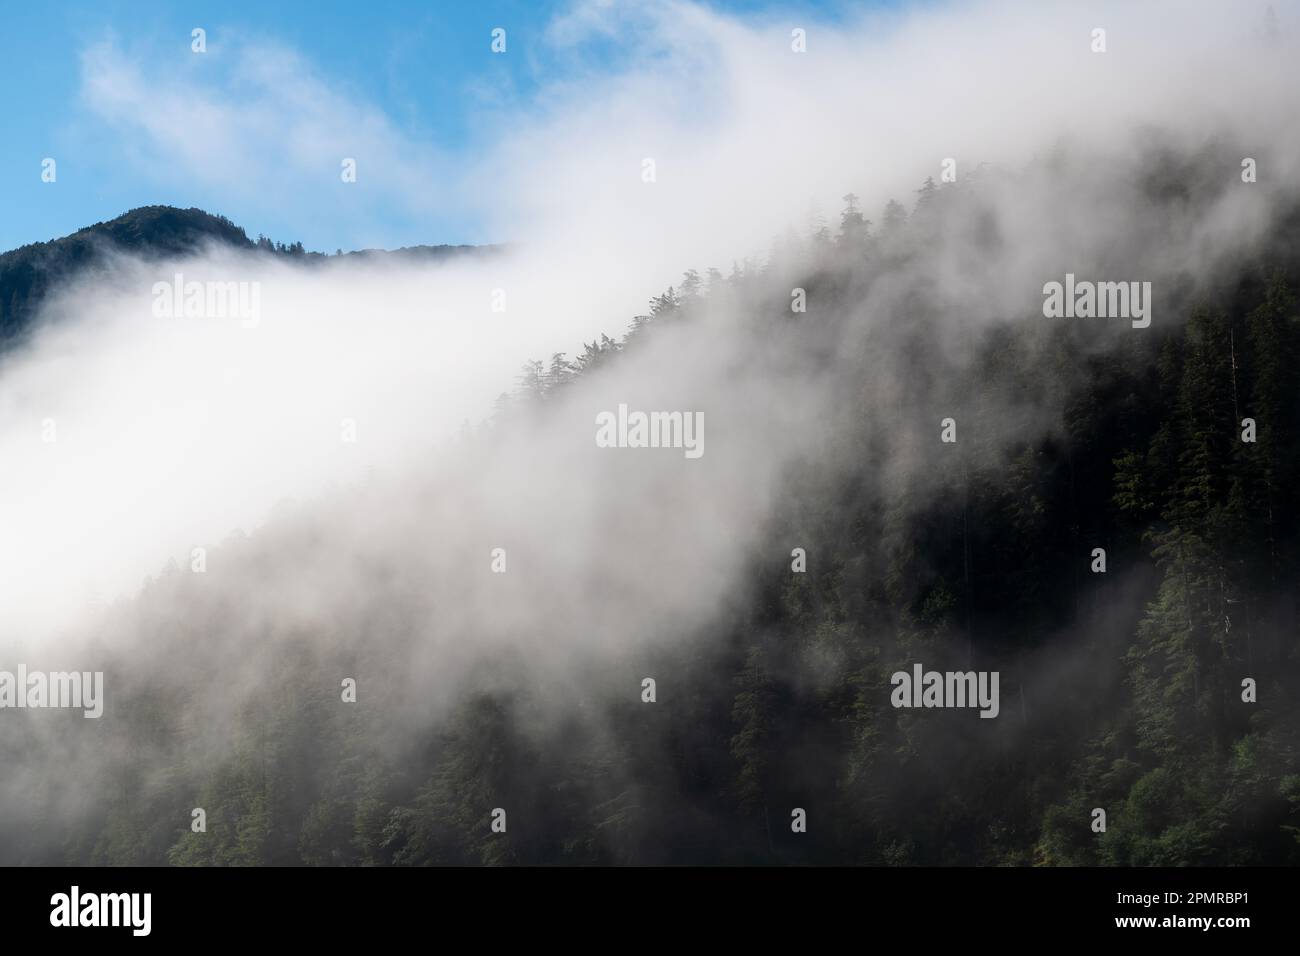 Mountain pine tree forest in mist and fog, British Columbia, Canada. Stock Photo